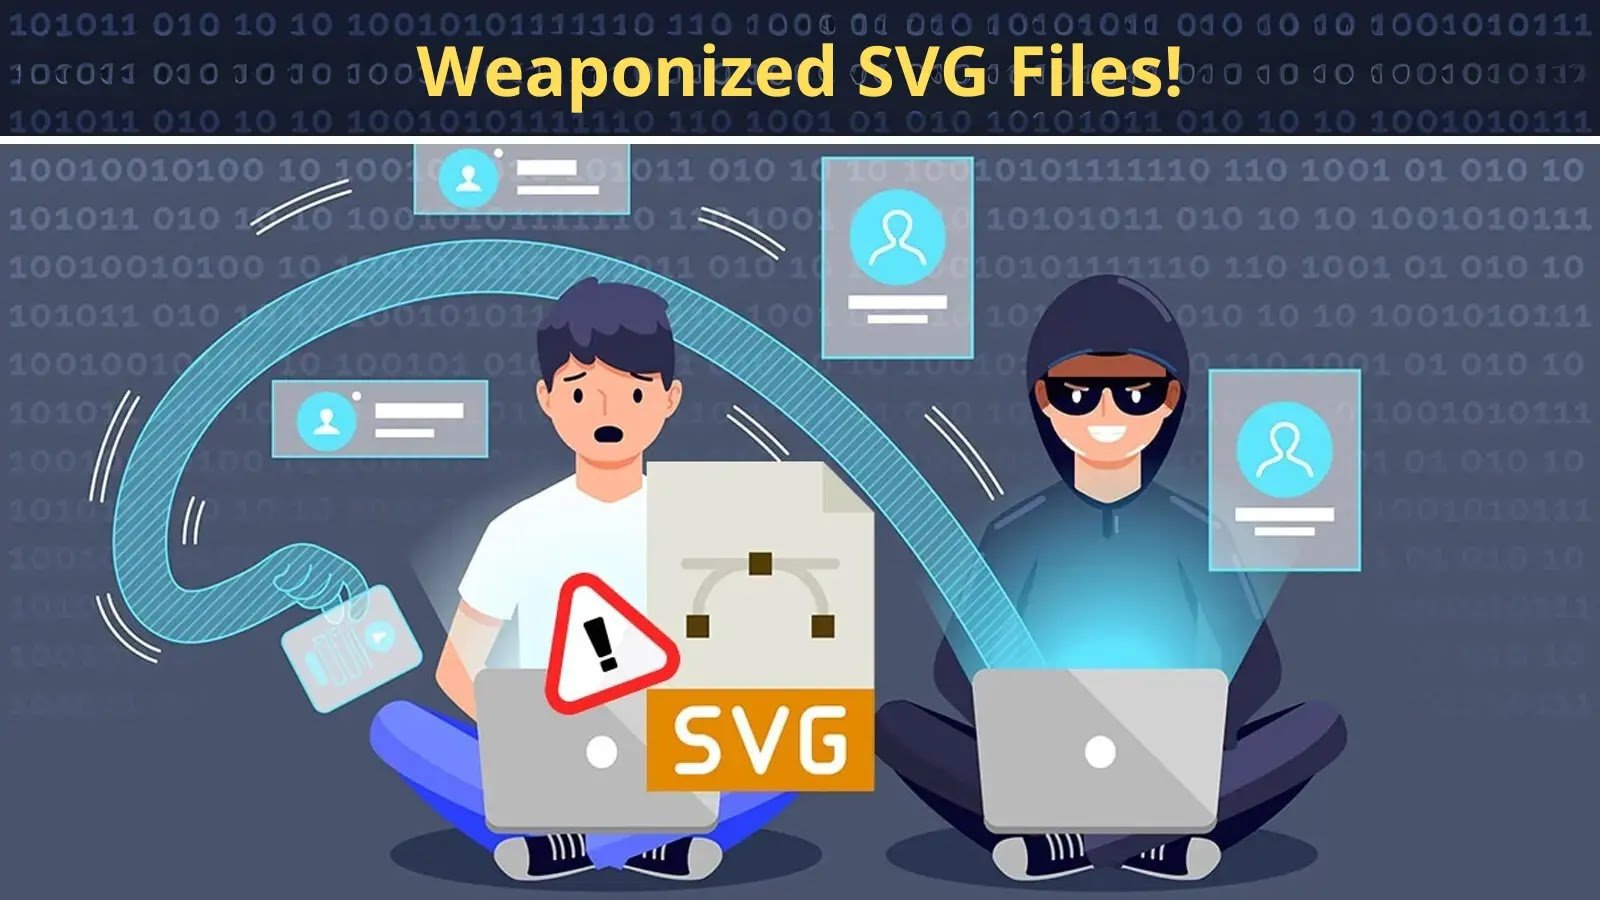 Weaponized SVG Files!